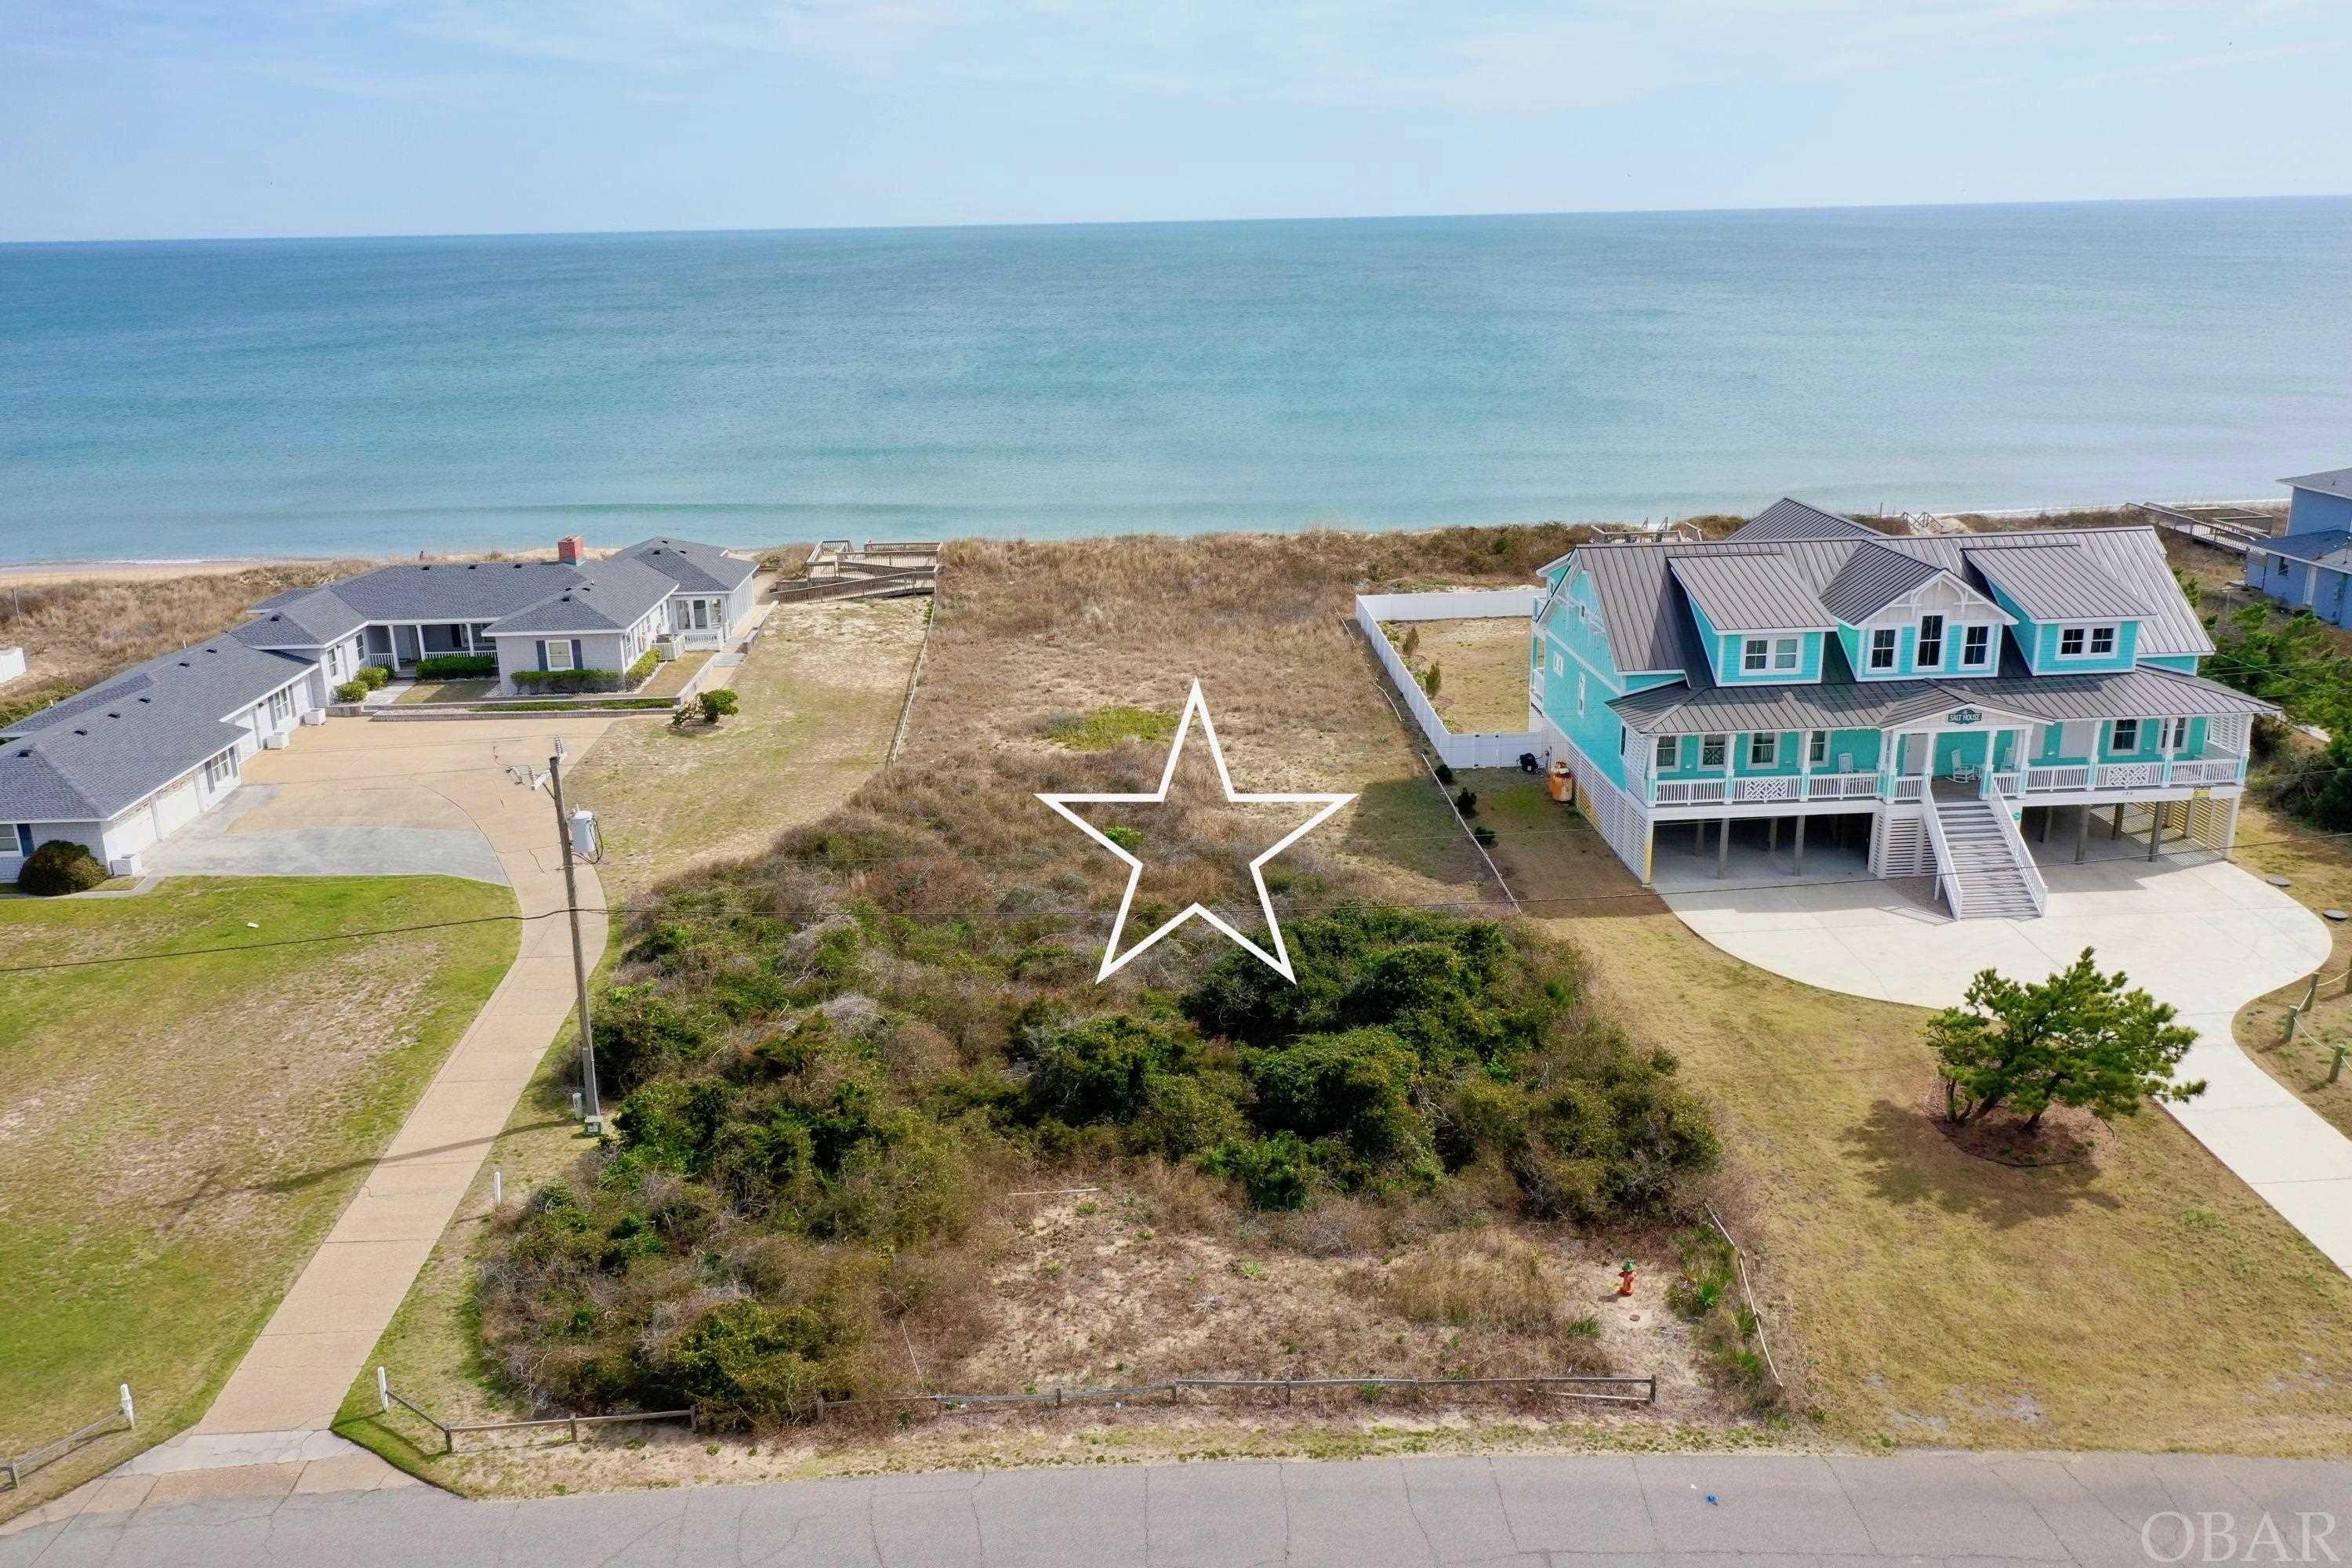 Rare opportunity to own a Premier Oceanfront lot in Southern Shores! There are very few oceanfront lots left in this highly desired location, north of the fork, and in Southern Shores. The Ocean Blvd. section is one of the Most Sought After neighborhoods because of the privacy, the separation between the property and Duck Rd. (very little traffic noise), uncrowded beaches, and the larger homesites. A truly coveted piece of oceanfront. Enjoy all Southern Shores has to offer with it's quaint Soundfront Beach, Playground, Tennis Courts, Picnic Area and 2 Marinas! Build your dream home today on this STUNNING homesite. According to the town of Southern Shores this lot can accommodate a luxurious 7 bedroom home with 5,000 Sq. ft., and allows just a 60' Oceanside setback. Need something larger? You can build the estate 120' from first line of vegetation. Buyers agent would need to confirm. .